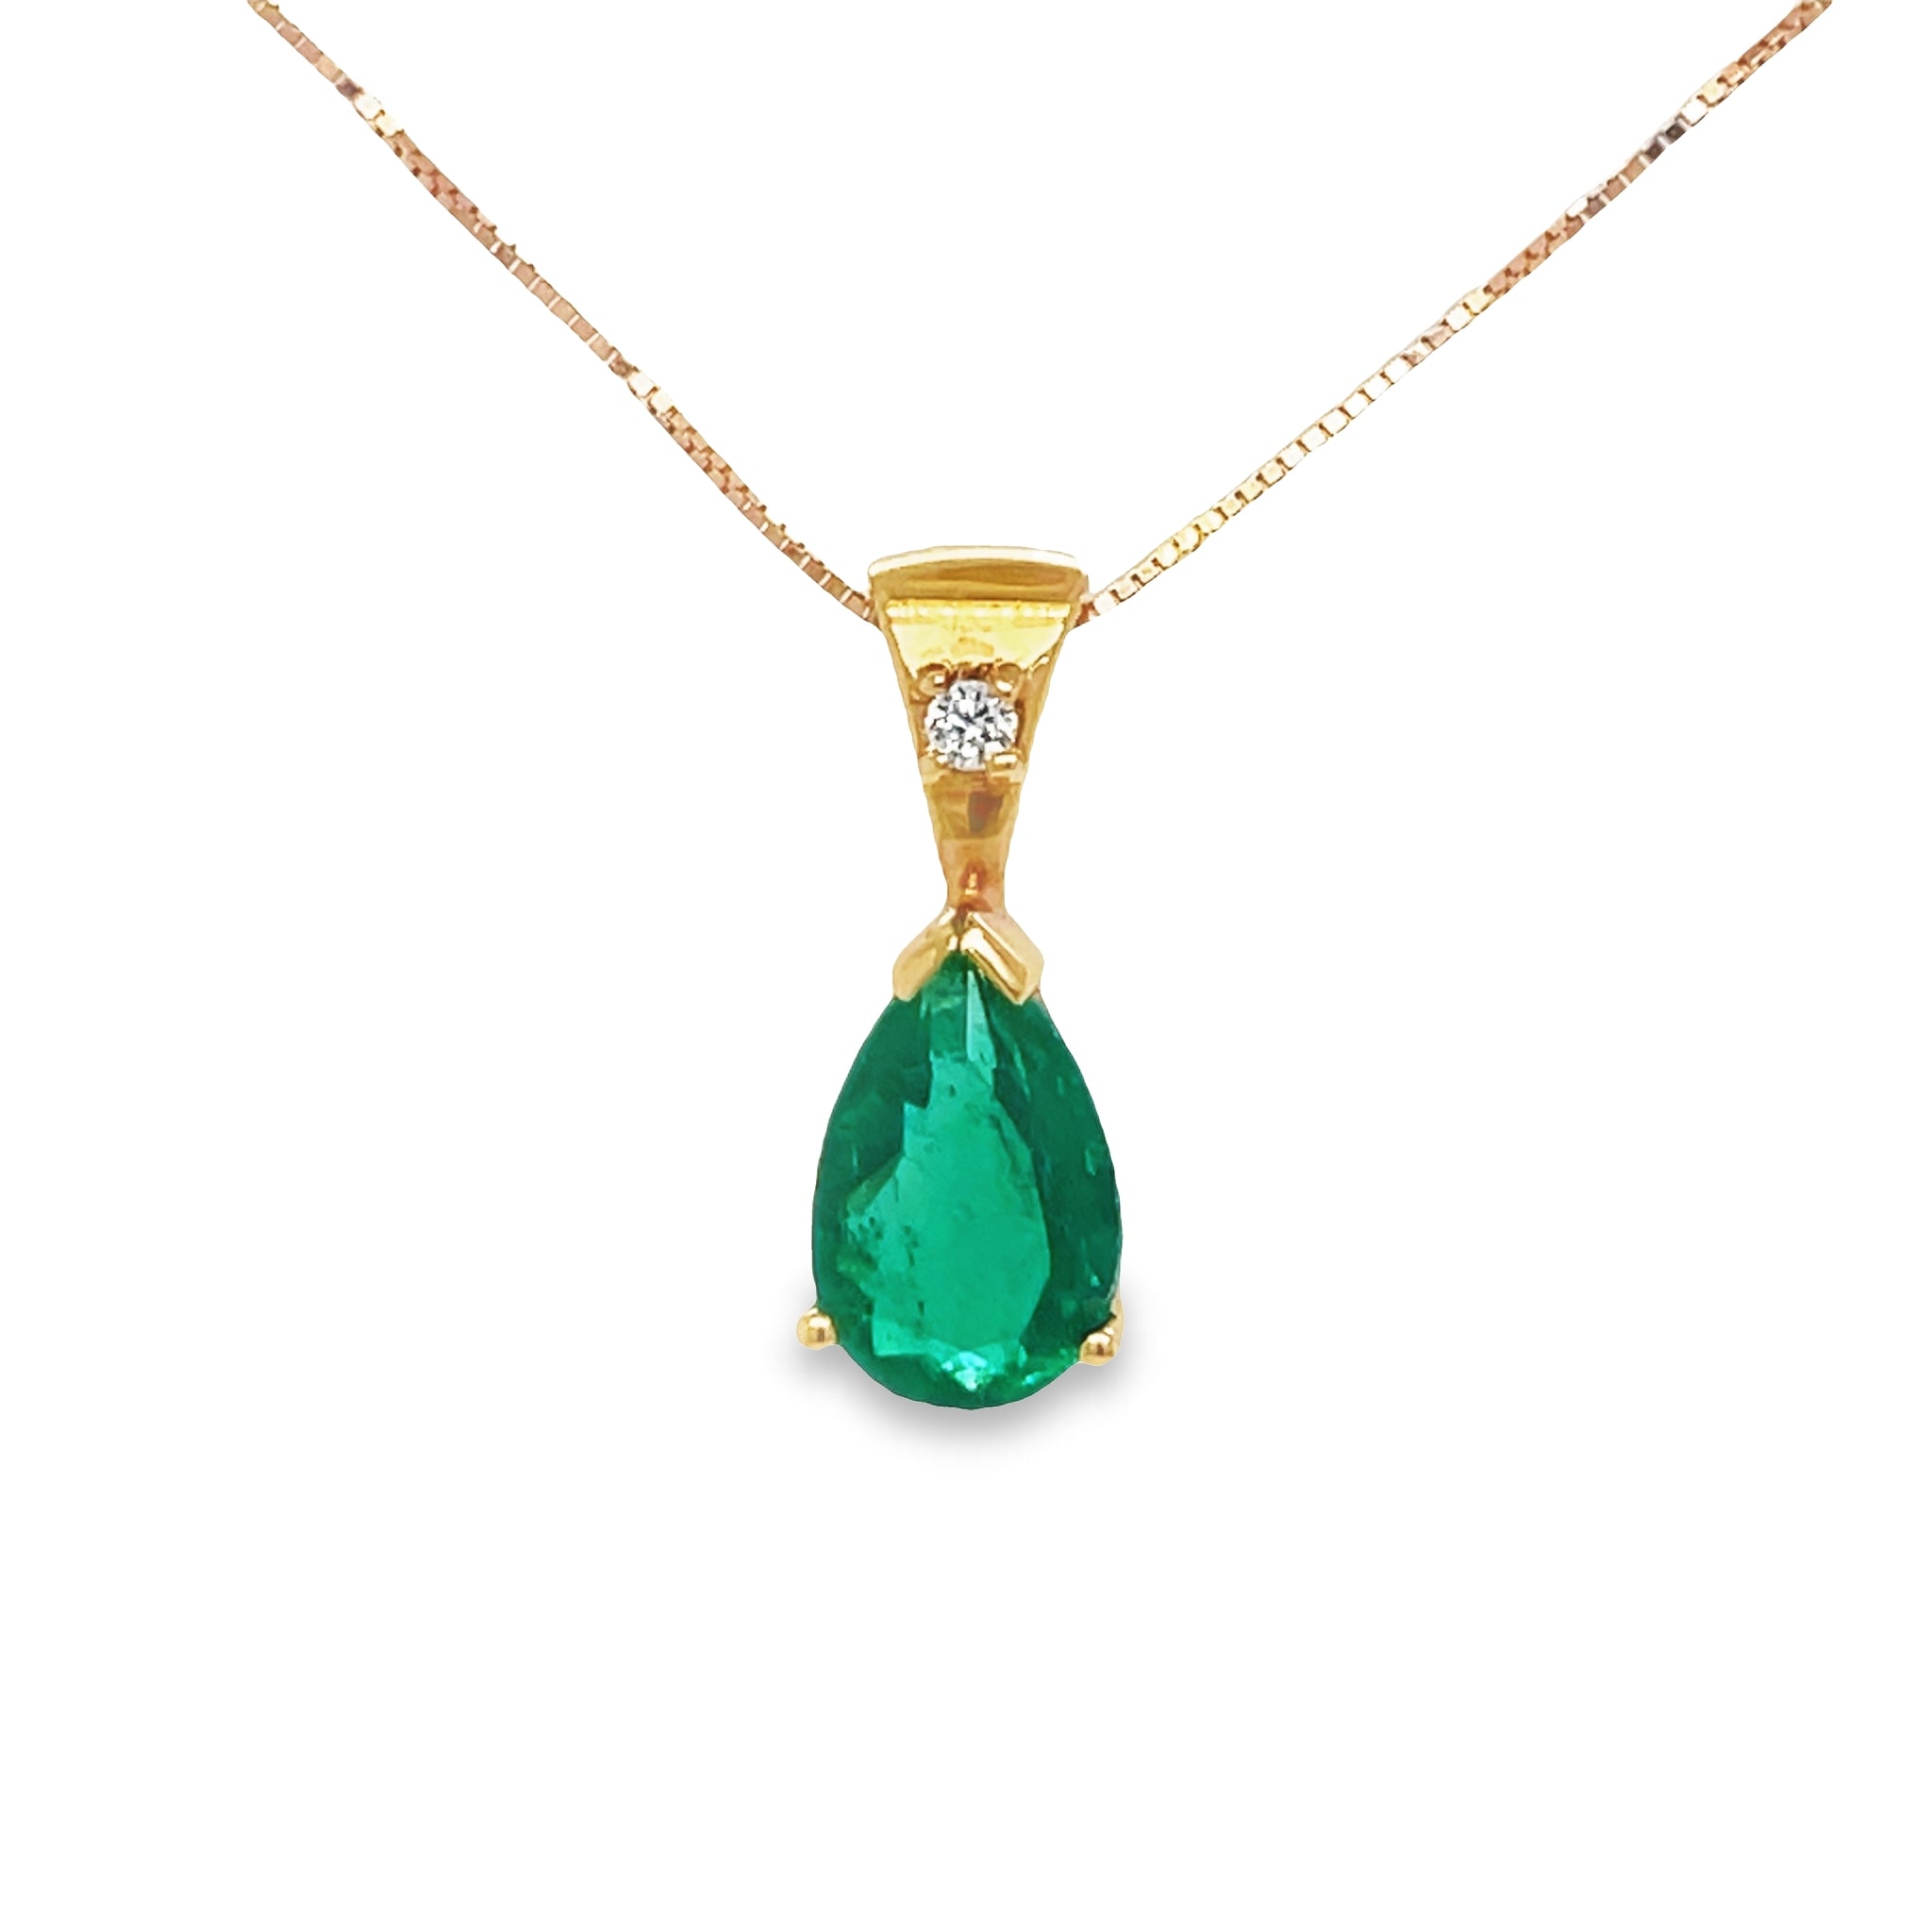 Stay on trend with this fashionable Pear Shape Colombian Emerald Pendant Necklace. Crafted with a masterful eye for detail, this necklace features a 1.78 ct emerald, set in 18k rose gold prong and an 18" chain 1.5 mm. Everything about this necklace is designed to make you look and feel beautiful!